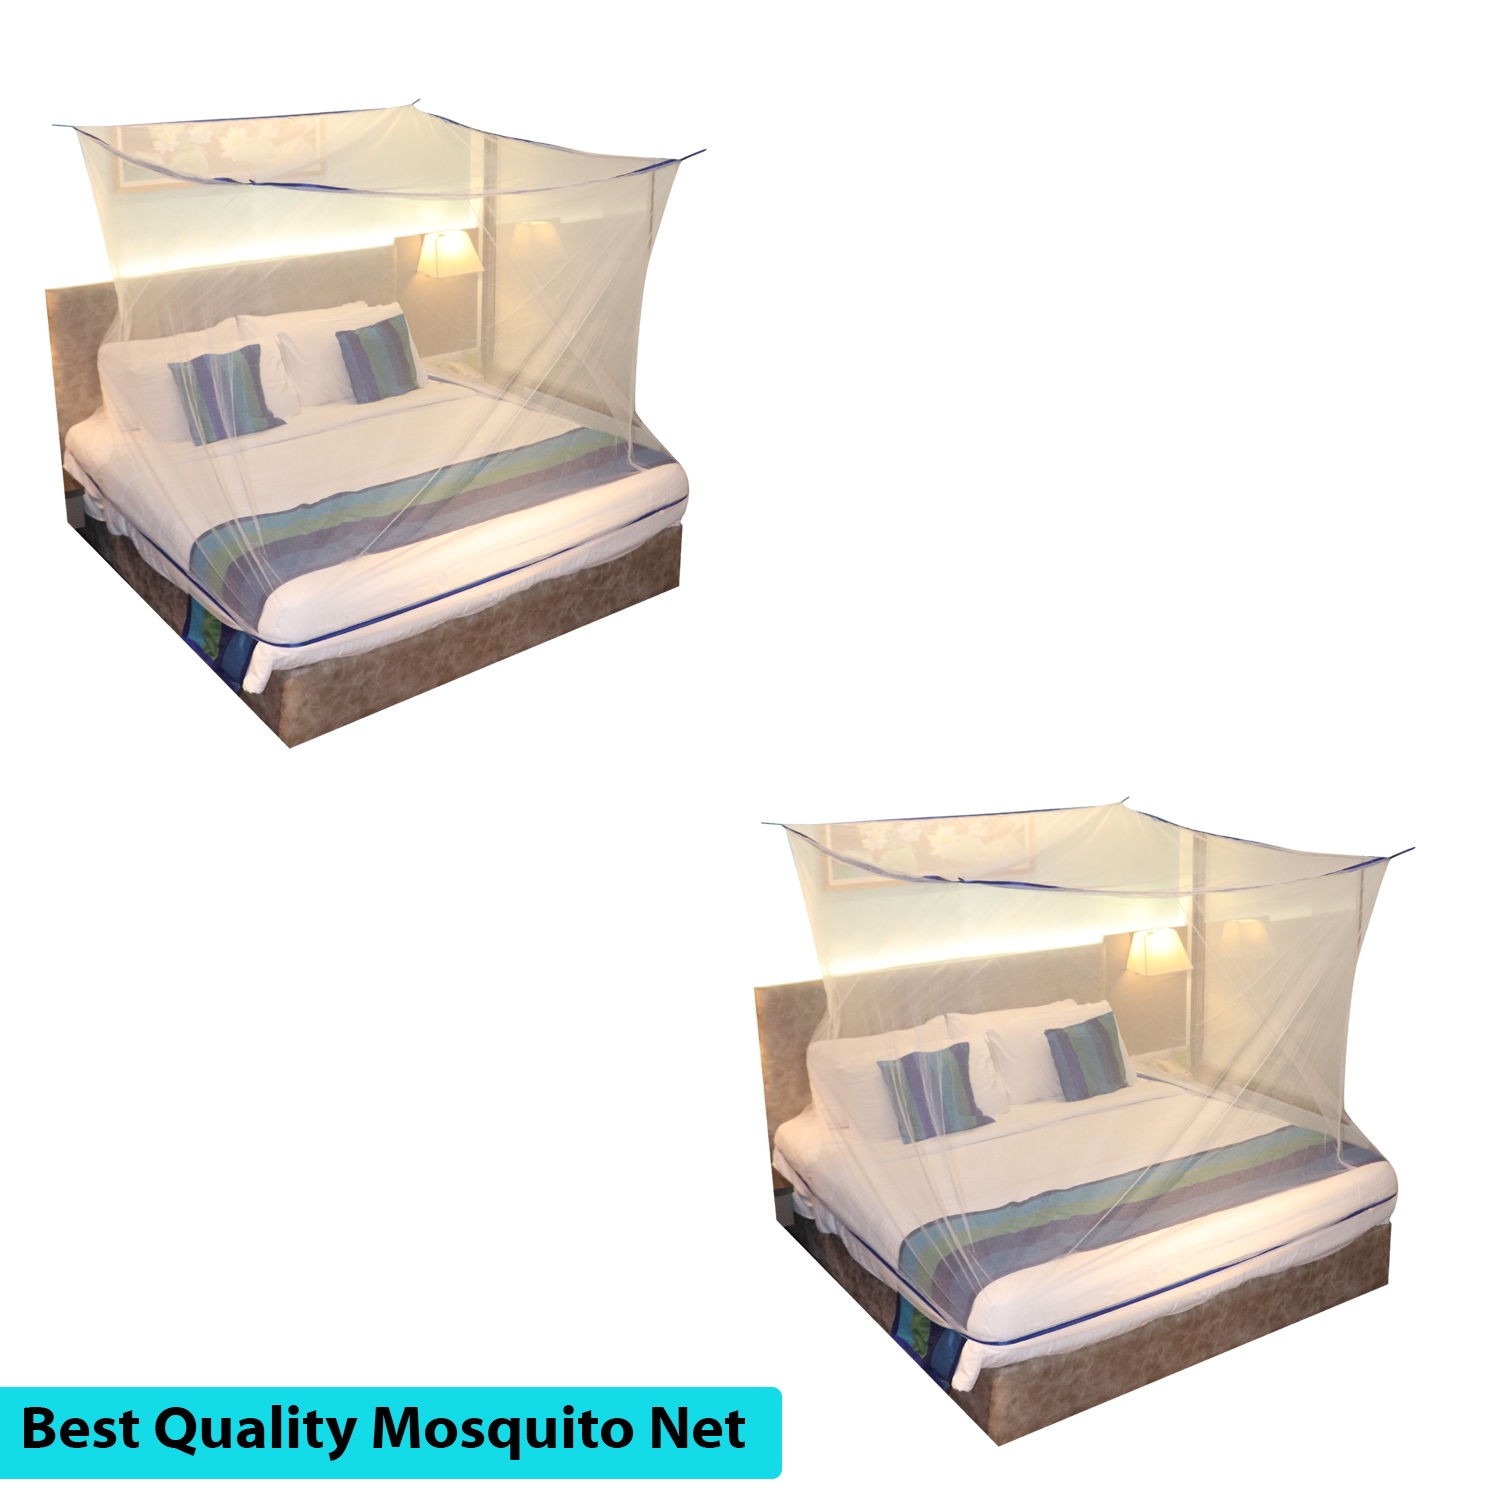 Mosquito Net for Double Bed, King-Size, Square Hanging Foldable Polyester Net White And BluePack of 2